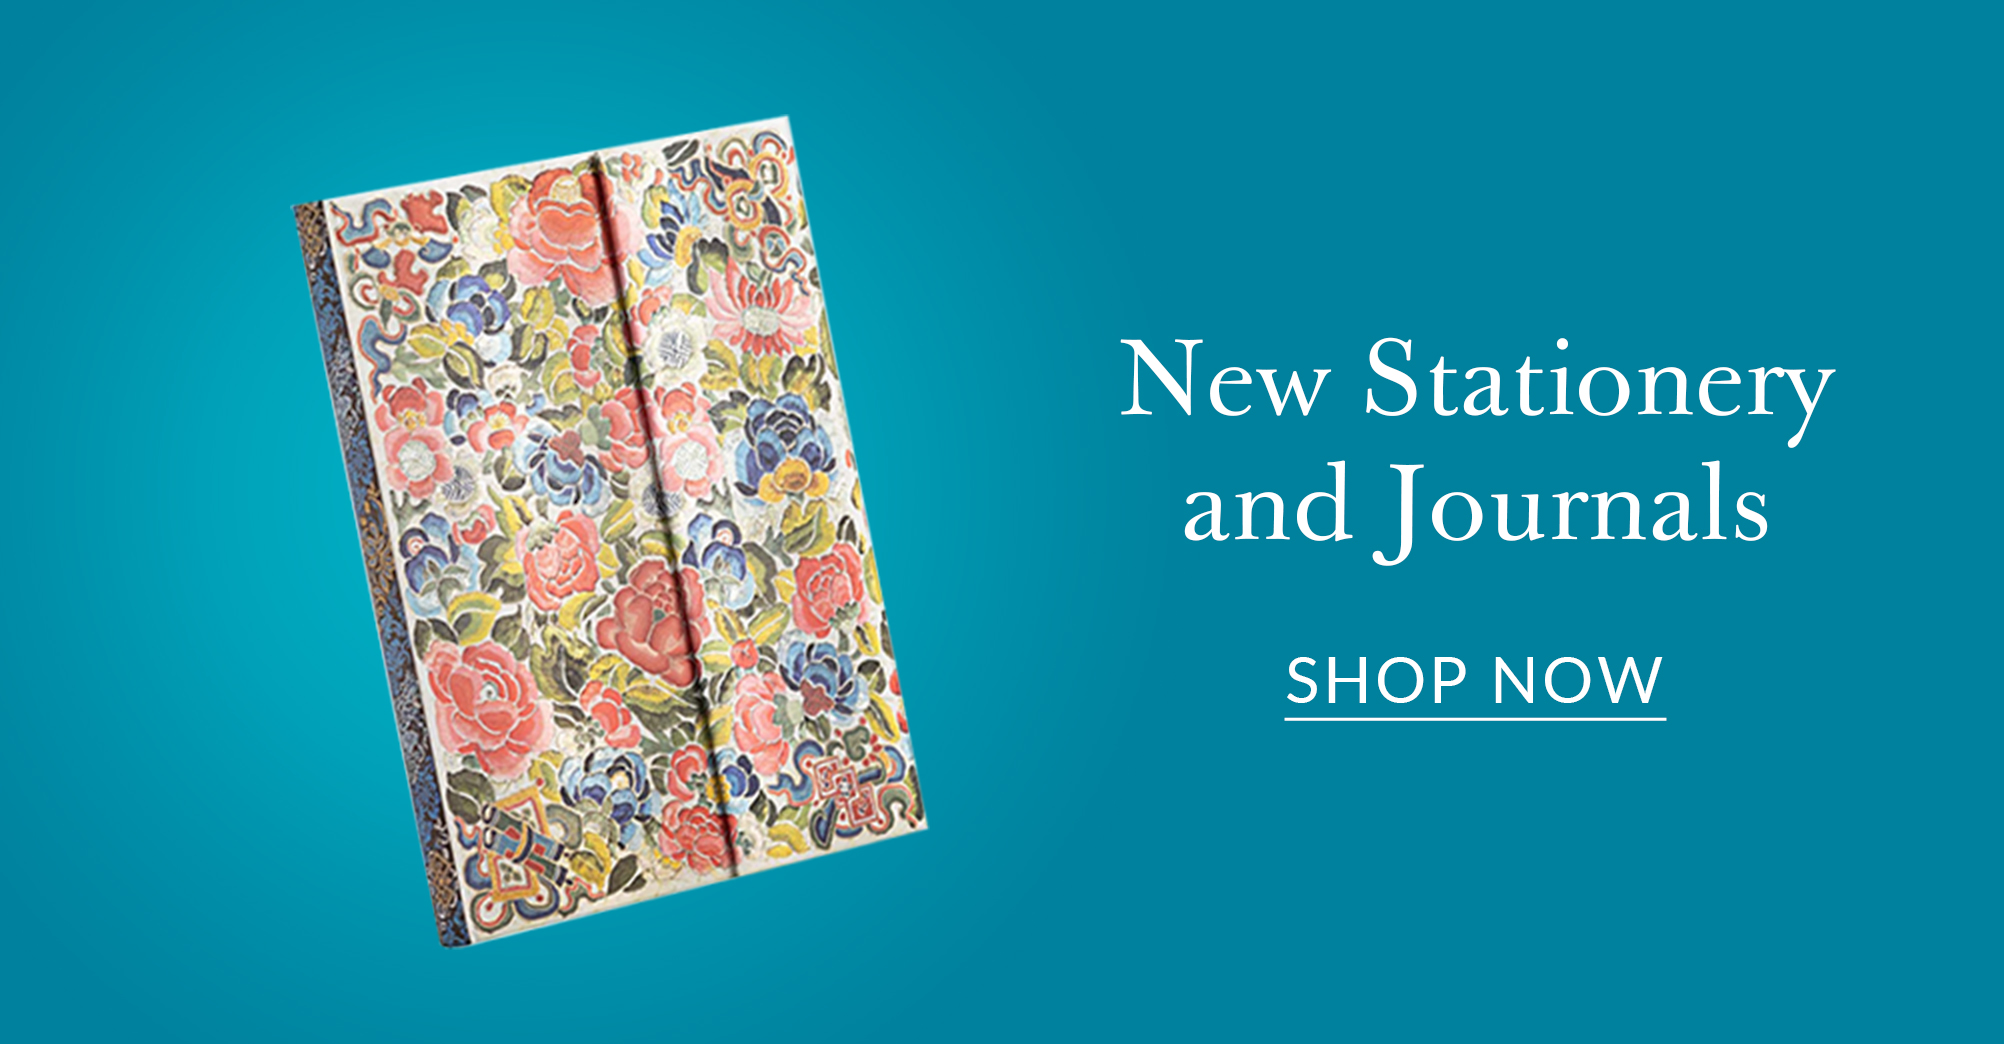 New Stationery and Journals